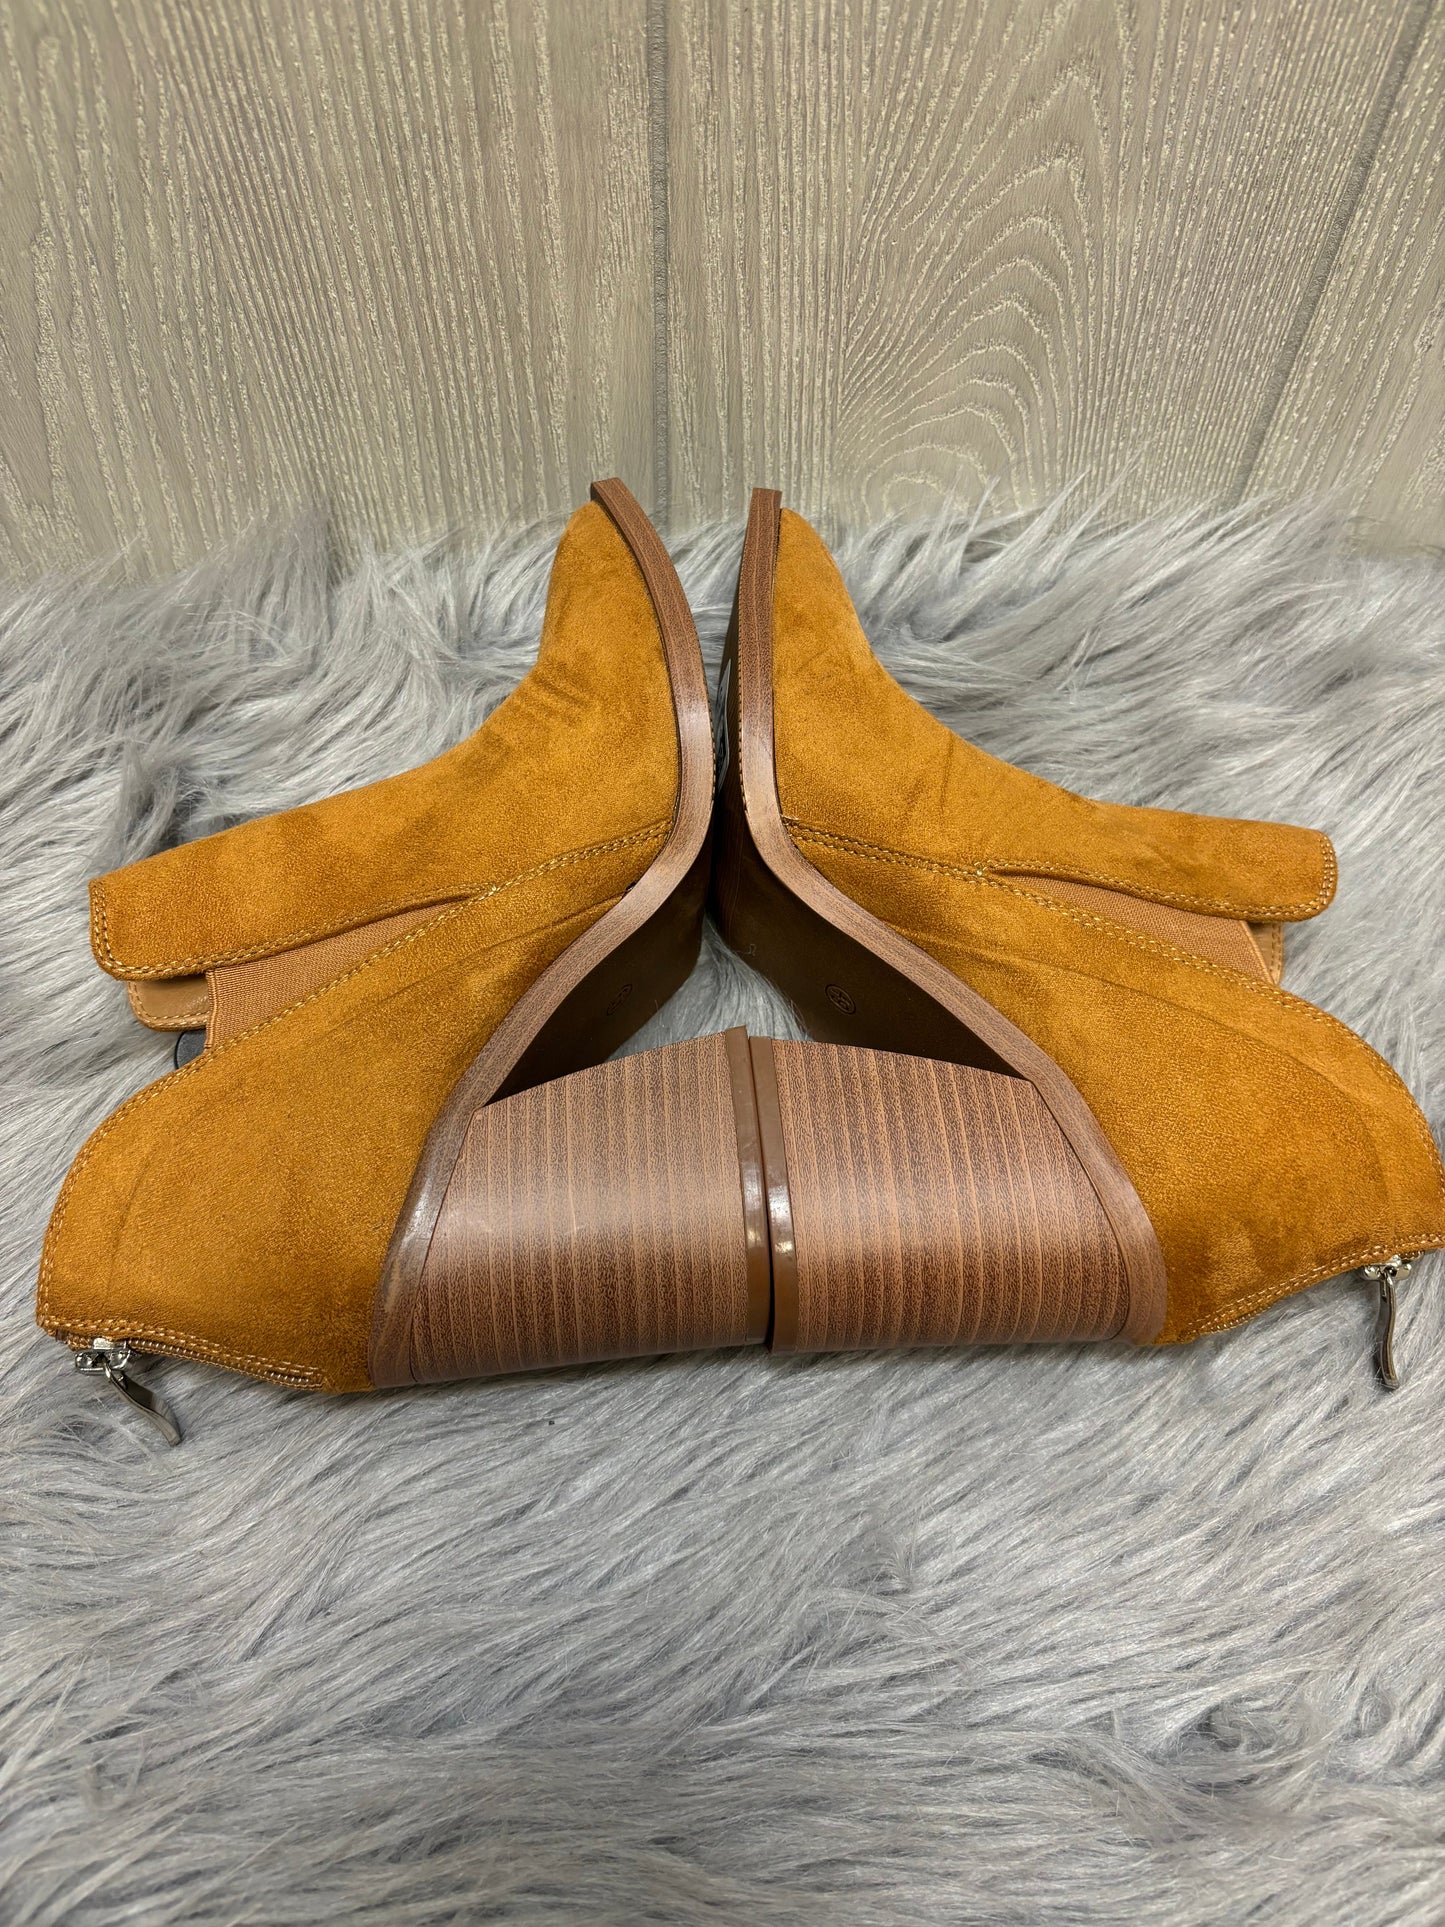 Tan Boots Ankle Heels Clothes Mentor, Size 6.5